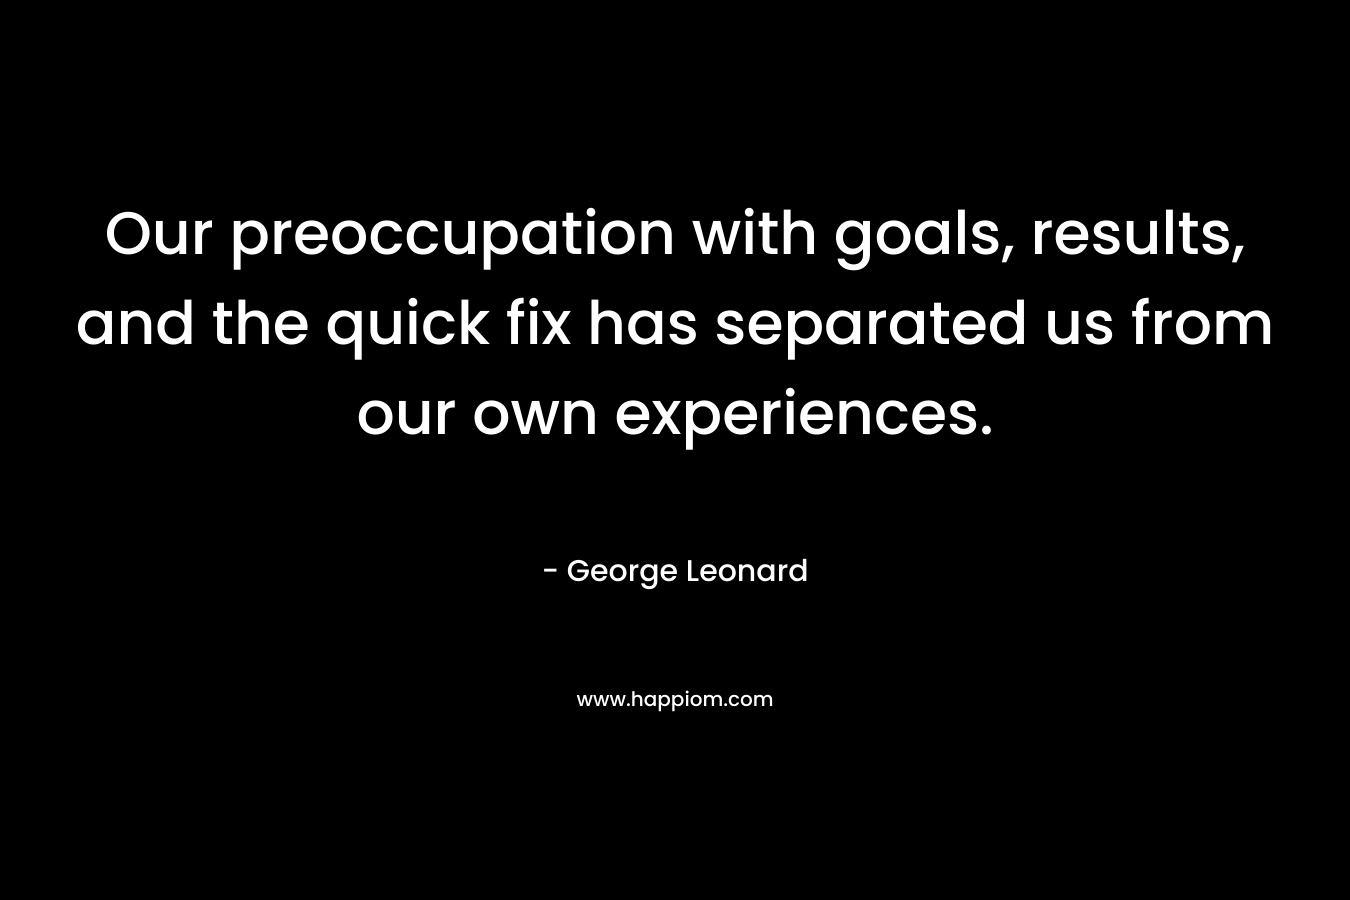 Our preoccupation with goals, results, and the quick fix has separated us from our own experiences. – George Leonard